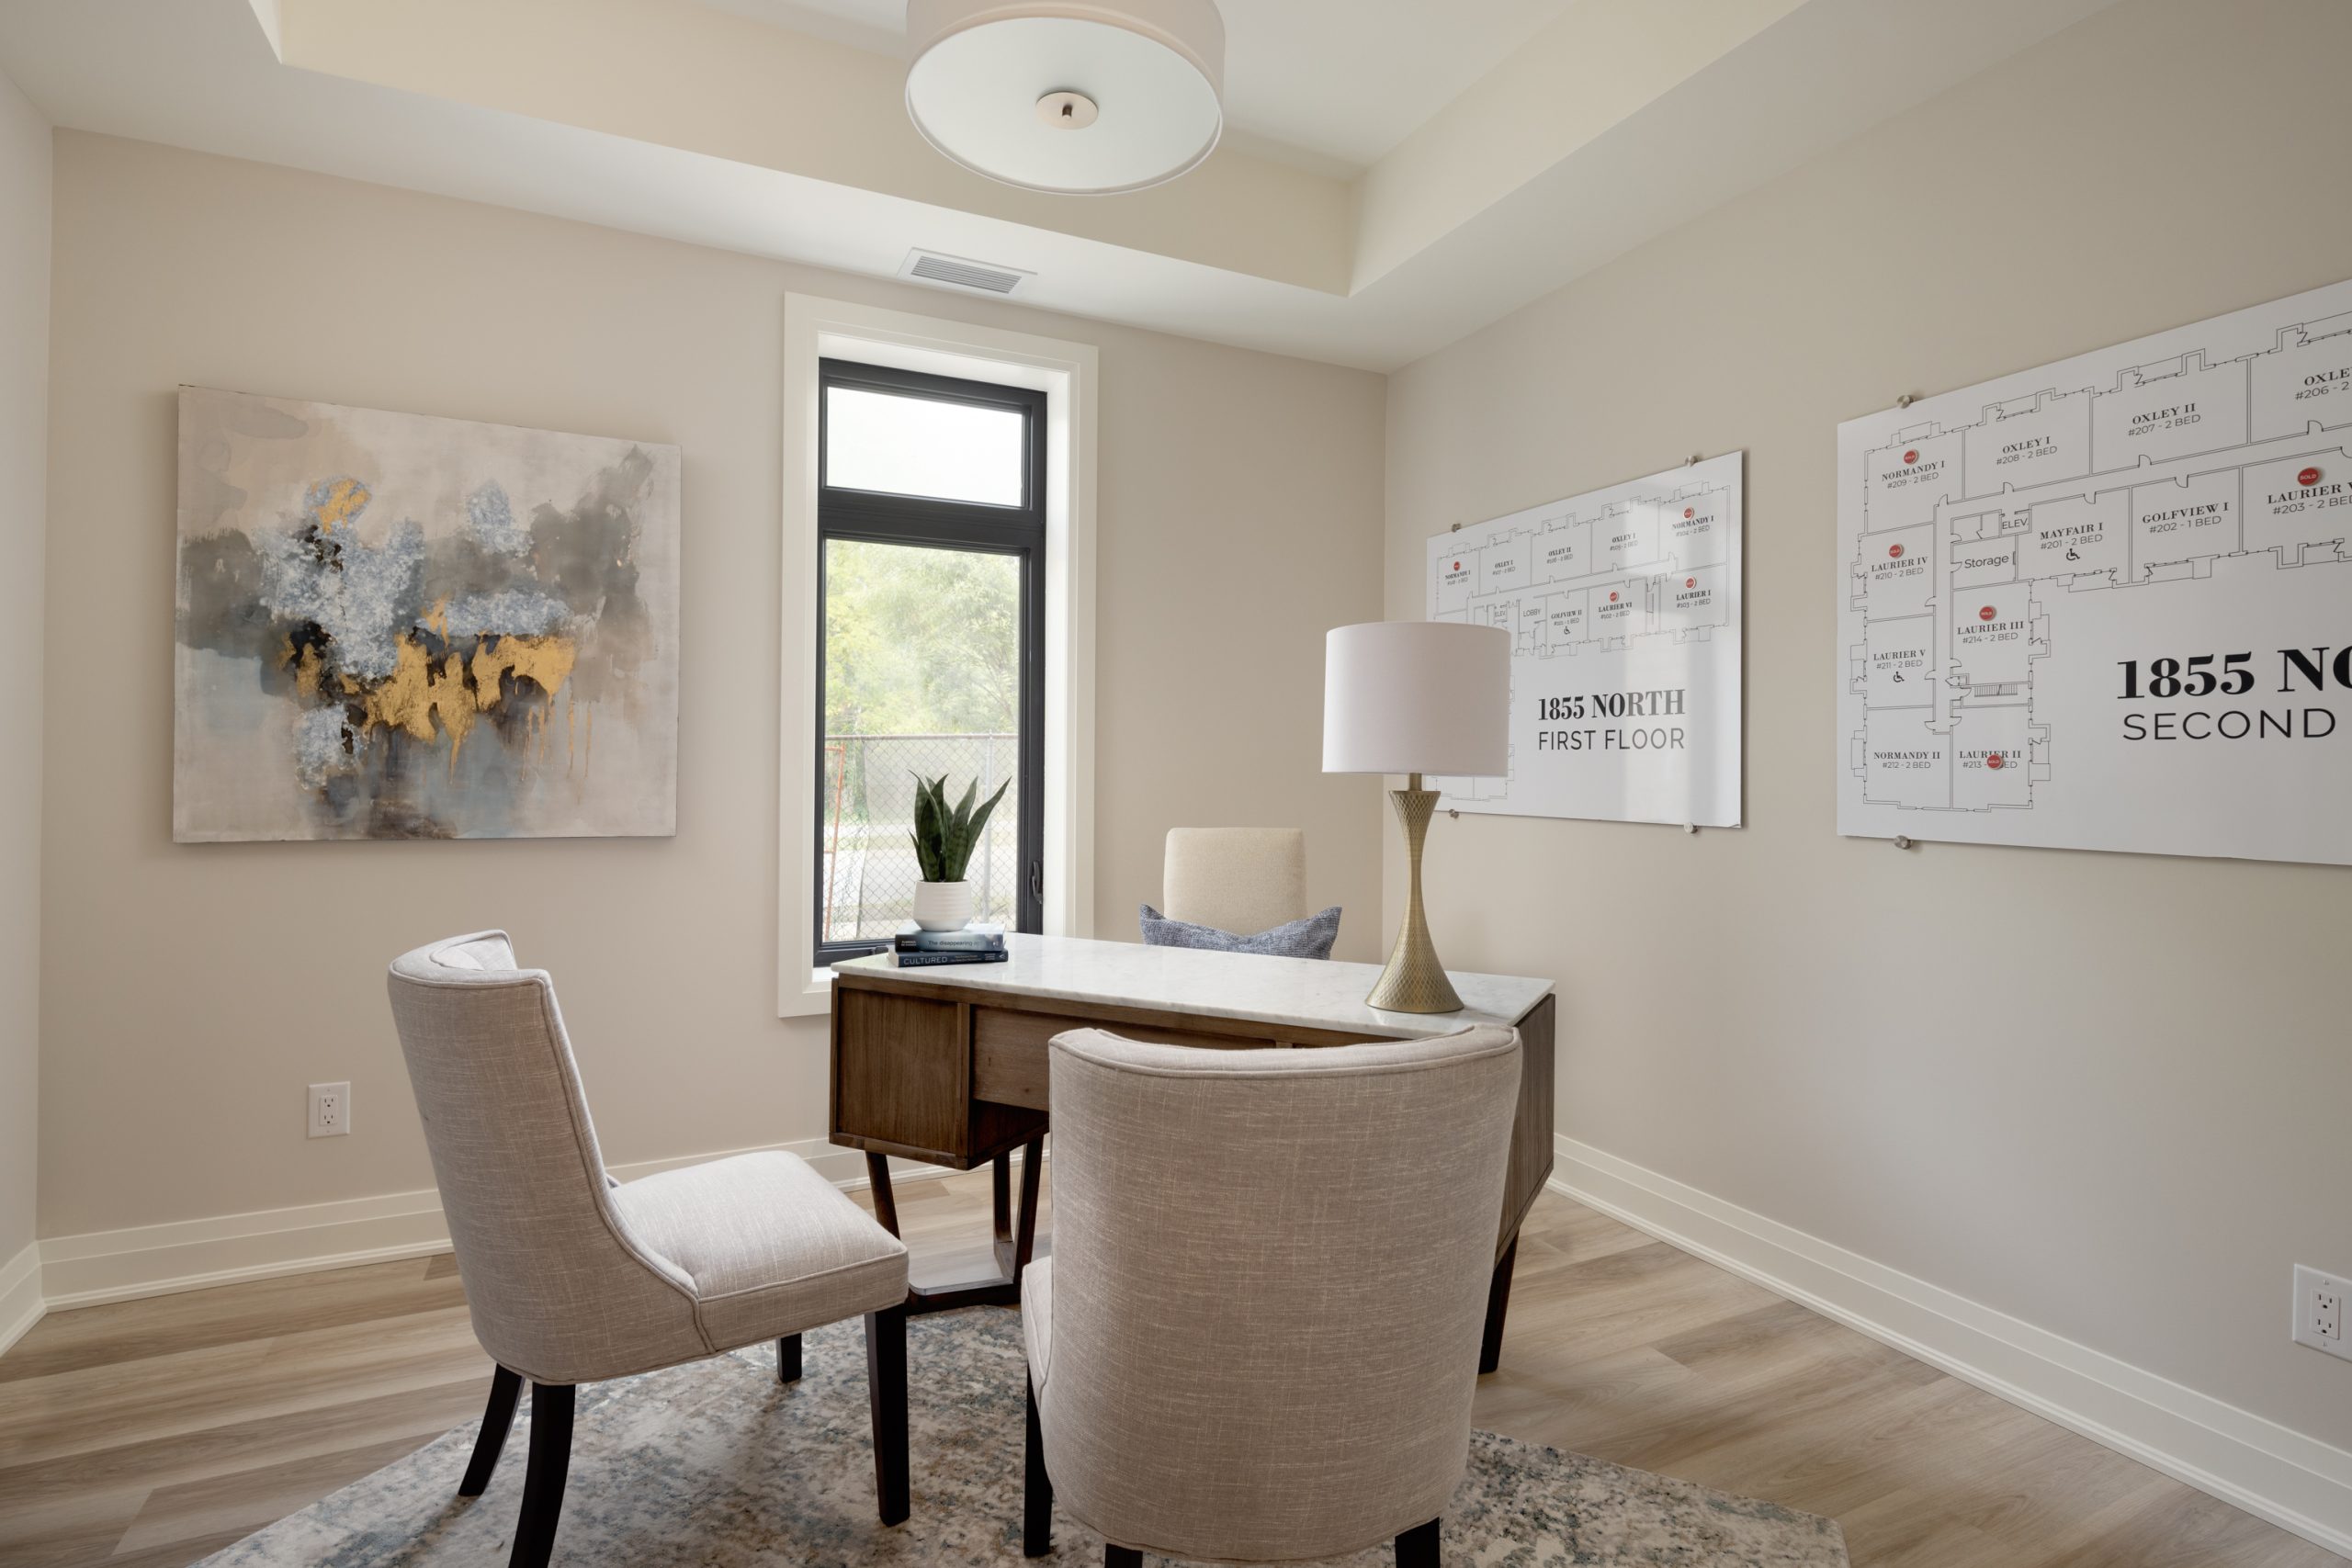 Home office featuring desk and 2 chairs. Floorplans for the homes are show on the wall.